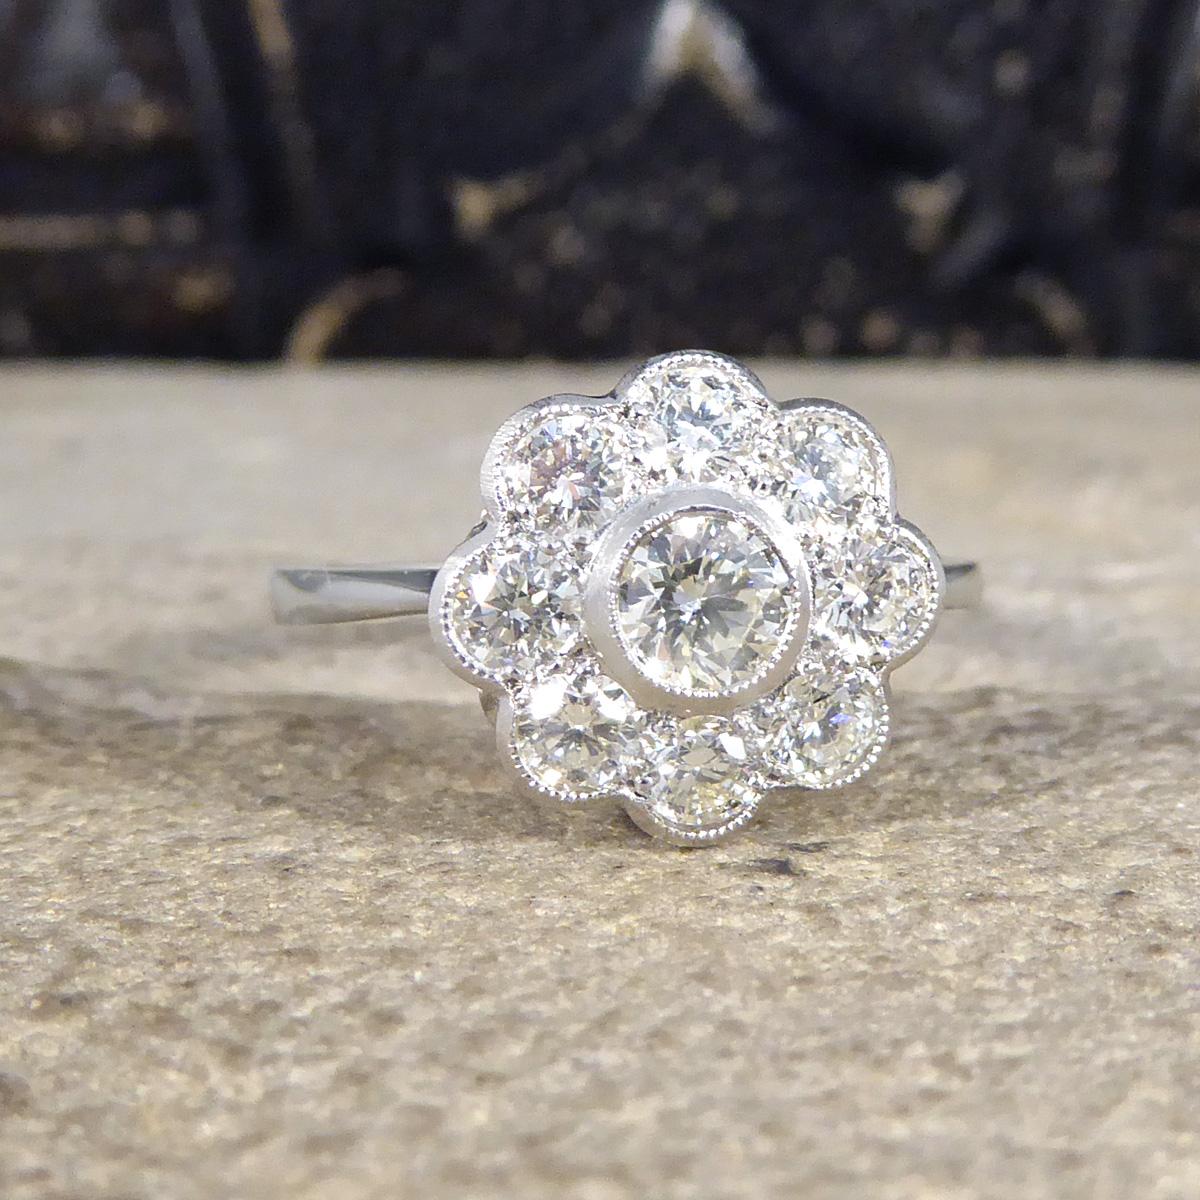 This fabulous Daisy cluster ring has a total of 1.00ct Modern Brilliant cut Diamonds and sparkles with from all angles in its cluster setting. All set in Platinum with a milegrain edge with a beautiful gallery, leading to a plain band and is a true